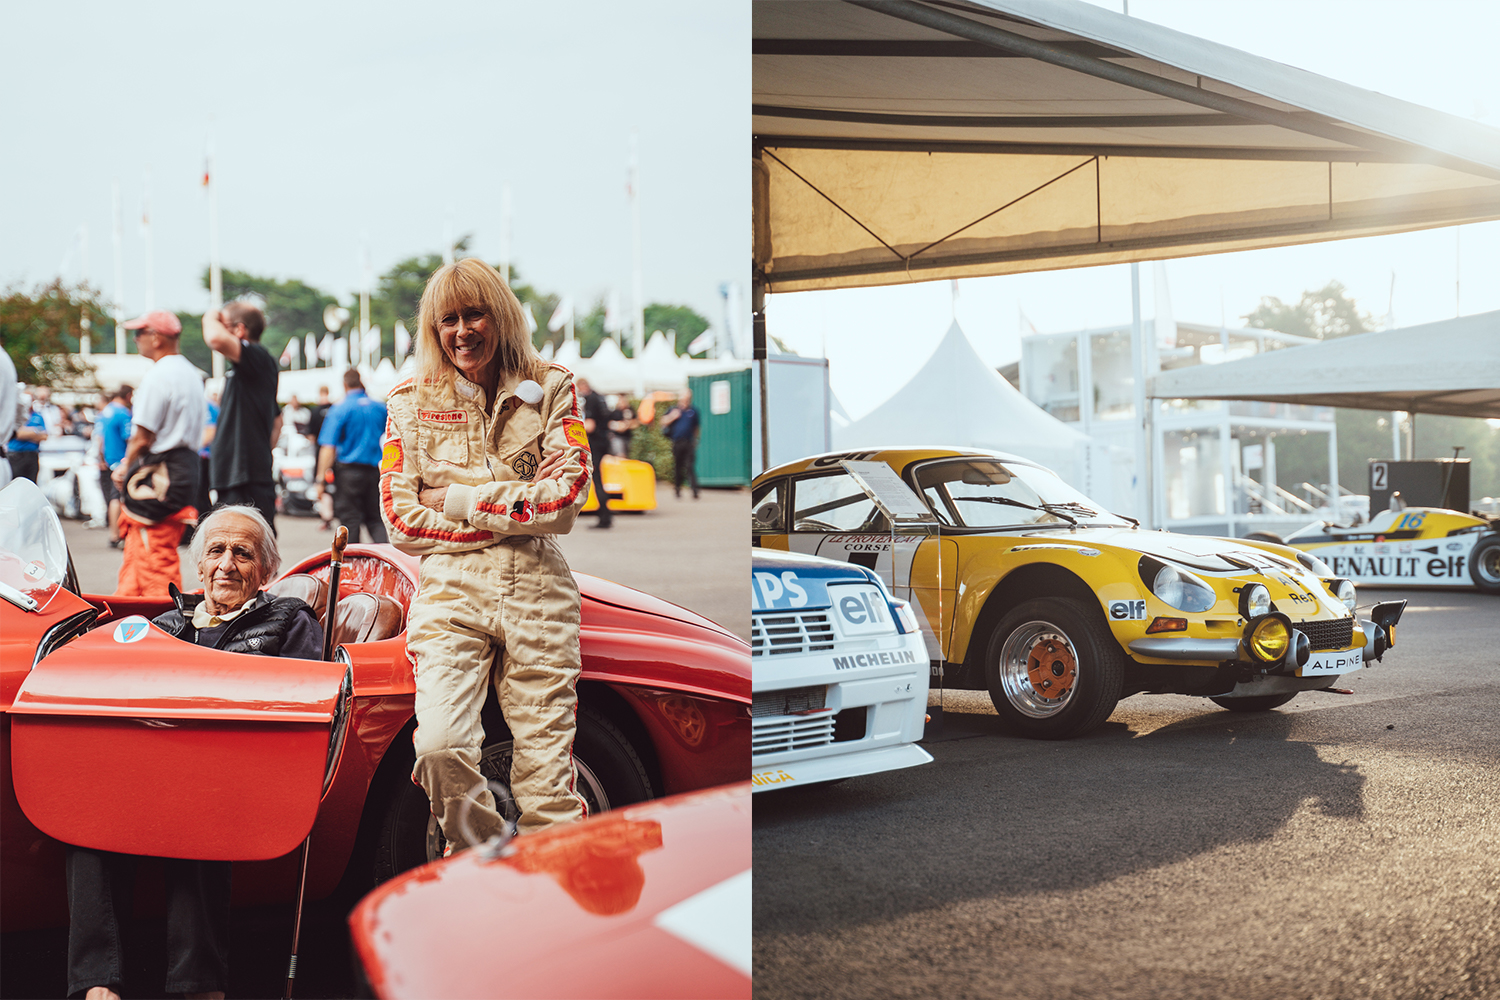 A man and woman in a classic car at the Goodwood Festival of Speed ​​2022 on the left.  To the right are vintage cars under a tent.